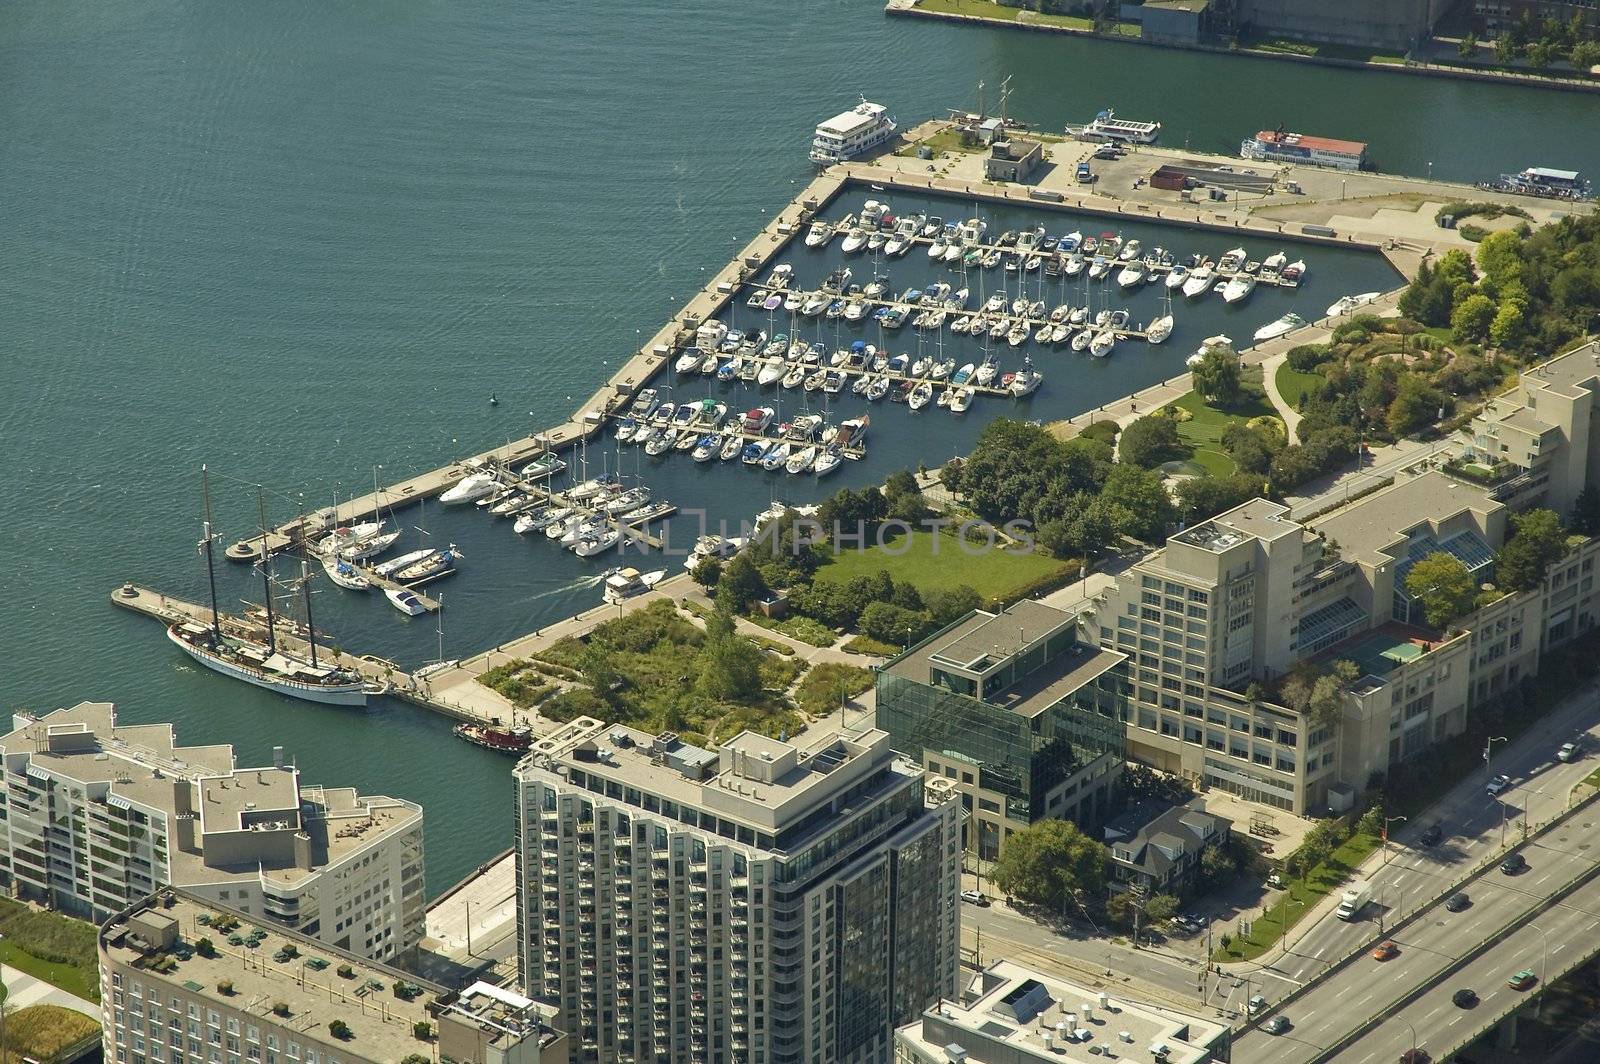 Toronto port aerial view, several small and one big yacht